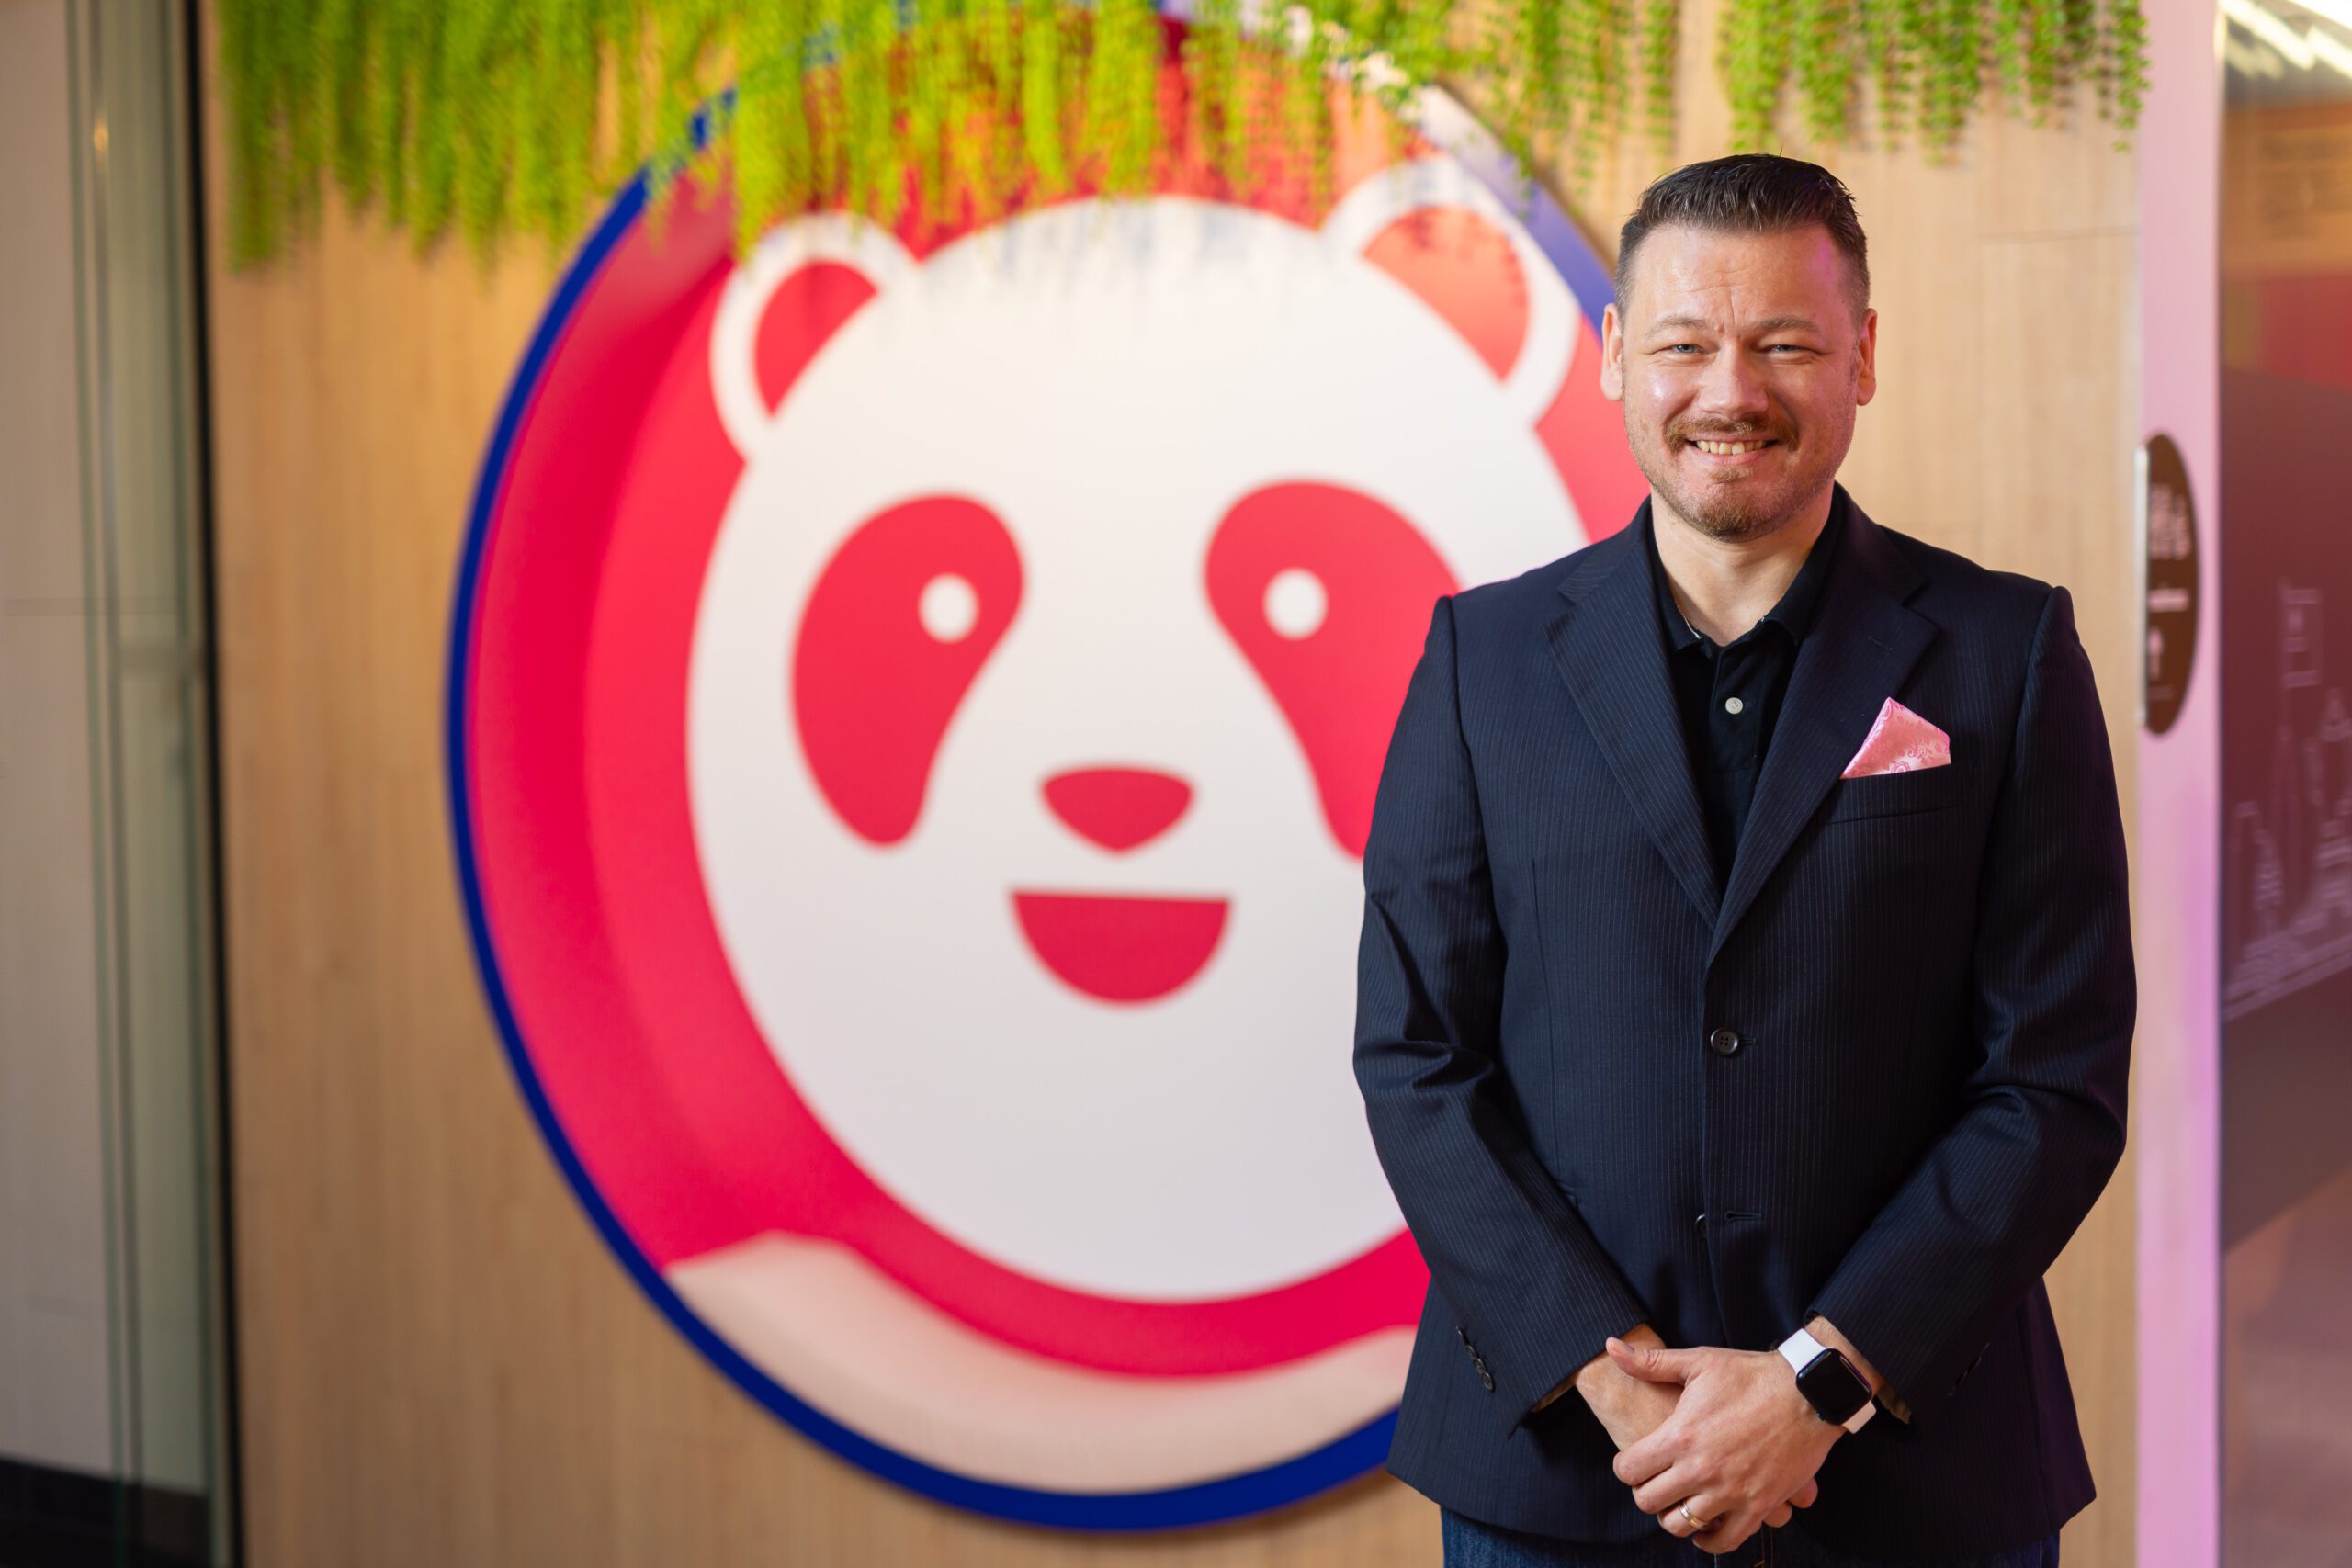 Image - ‘Tasty Thursday’, a 24/7 EAP, and more: foodpanda’s approach to delivering the employee experience